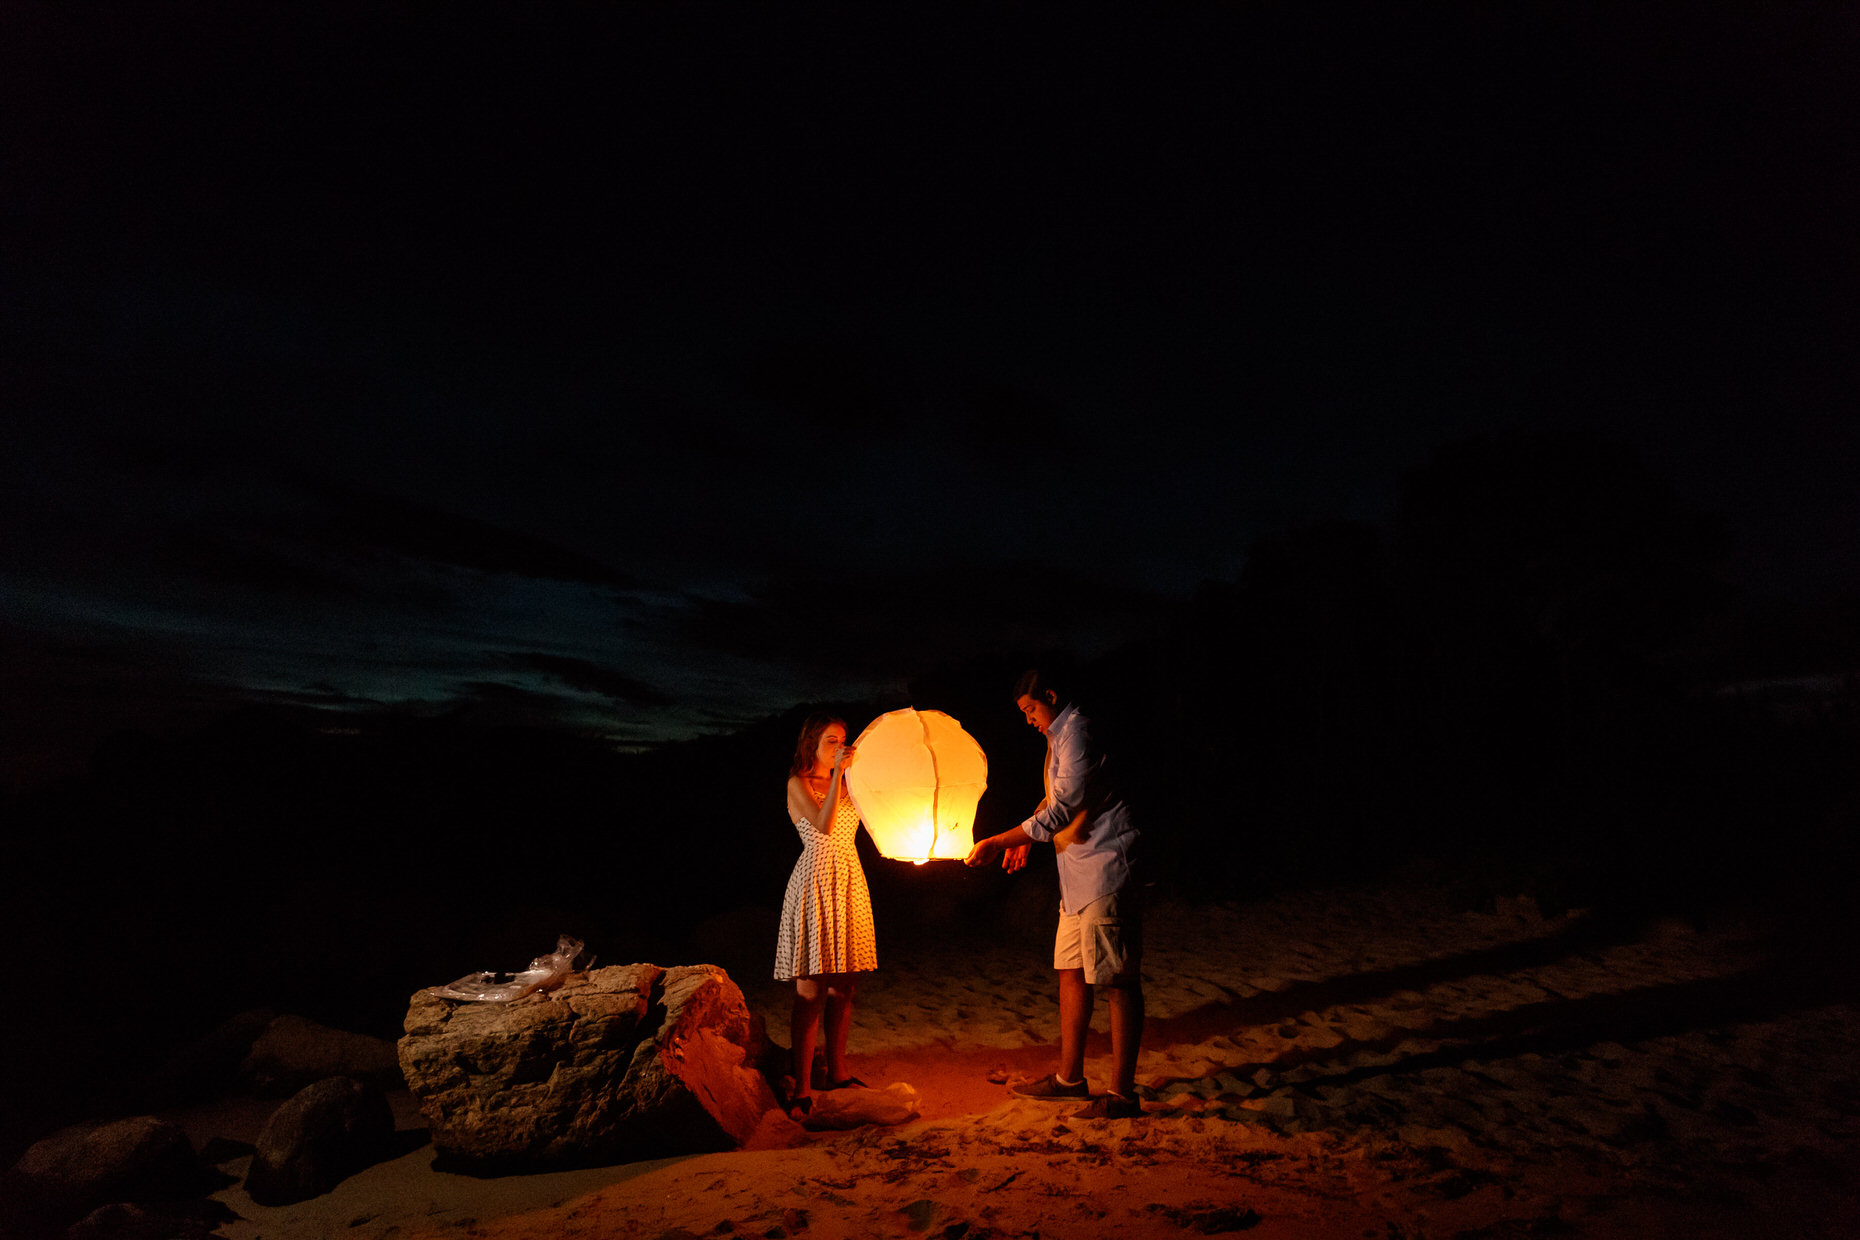 Sky Lantern from Erica and Jeevan